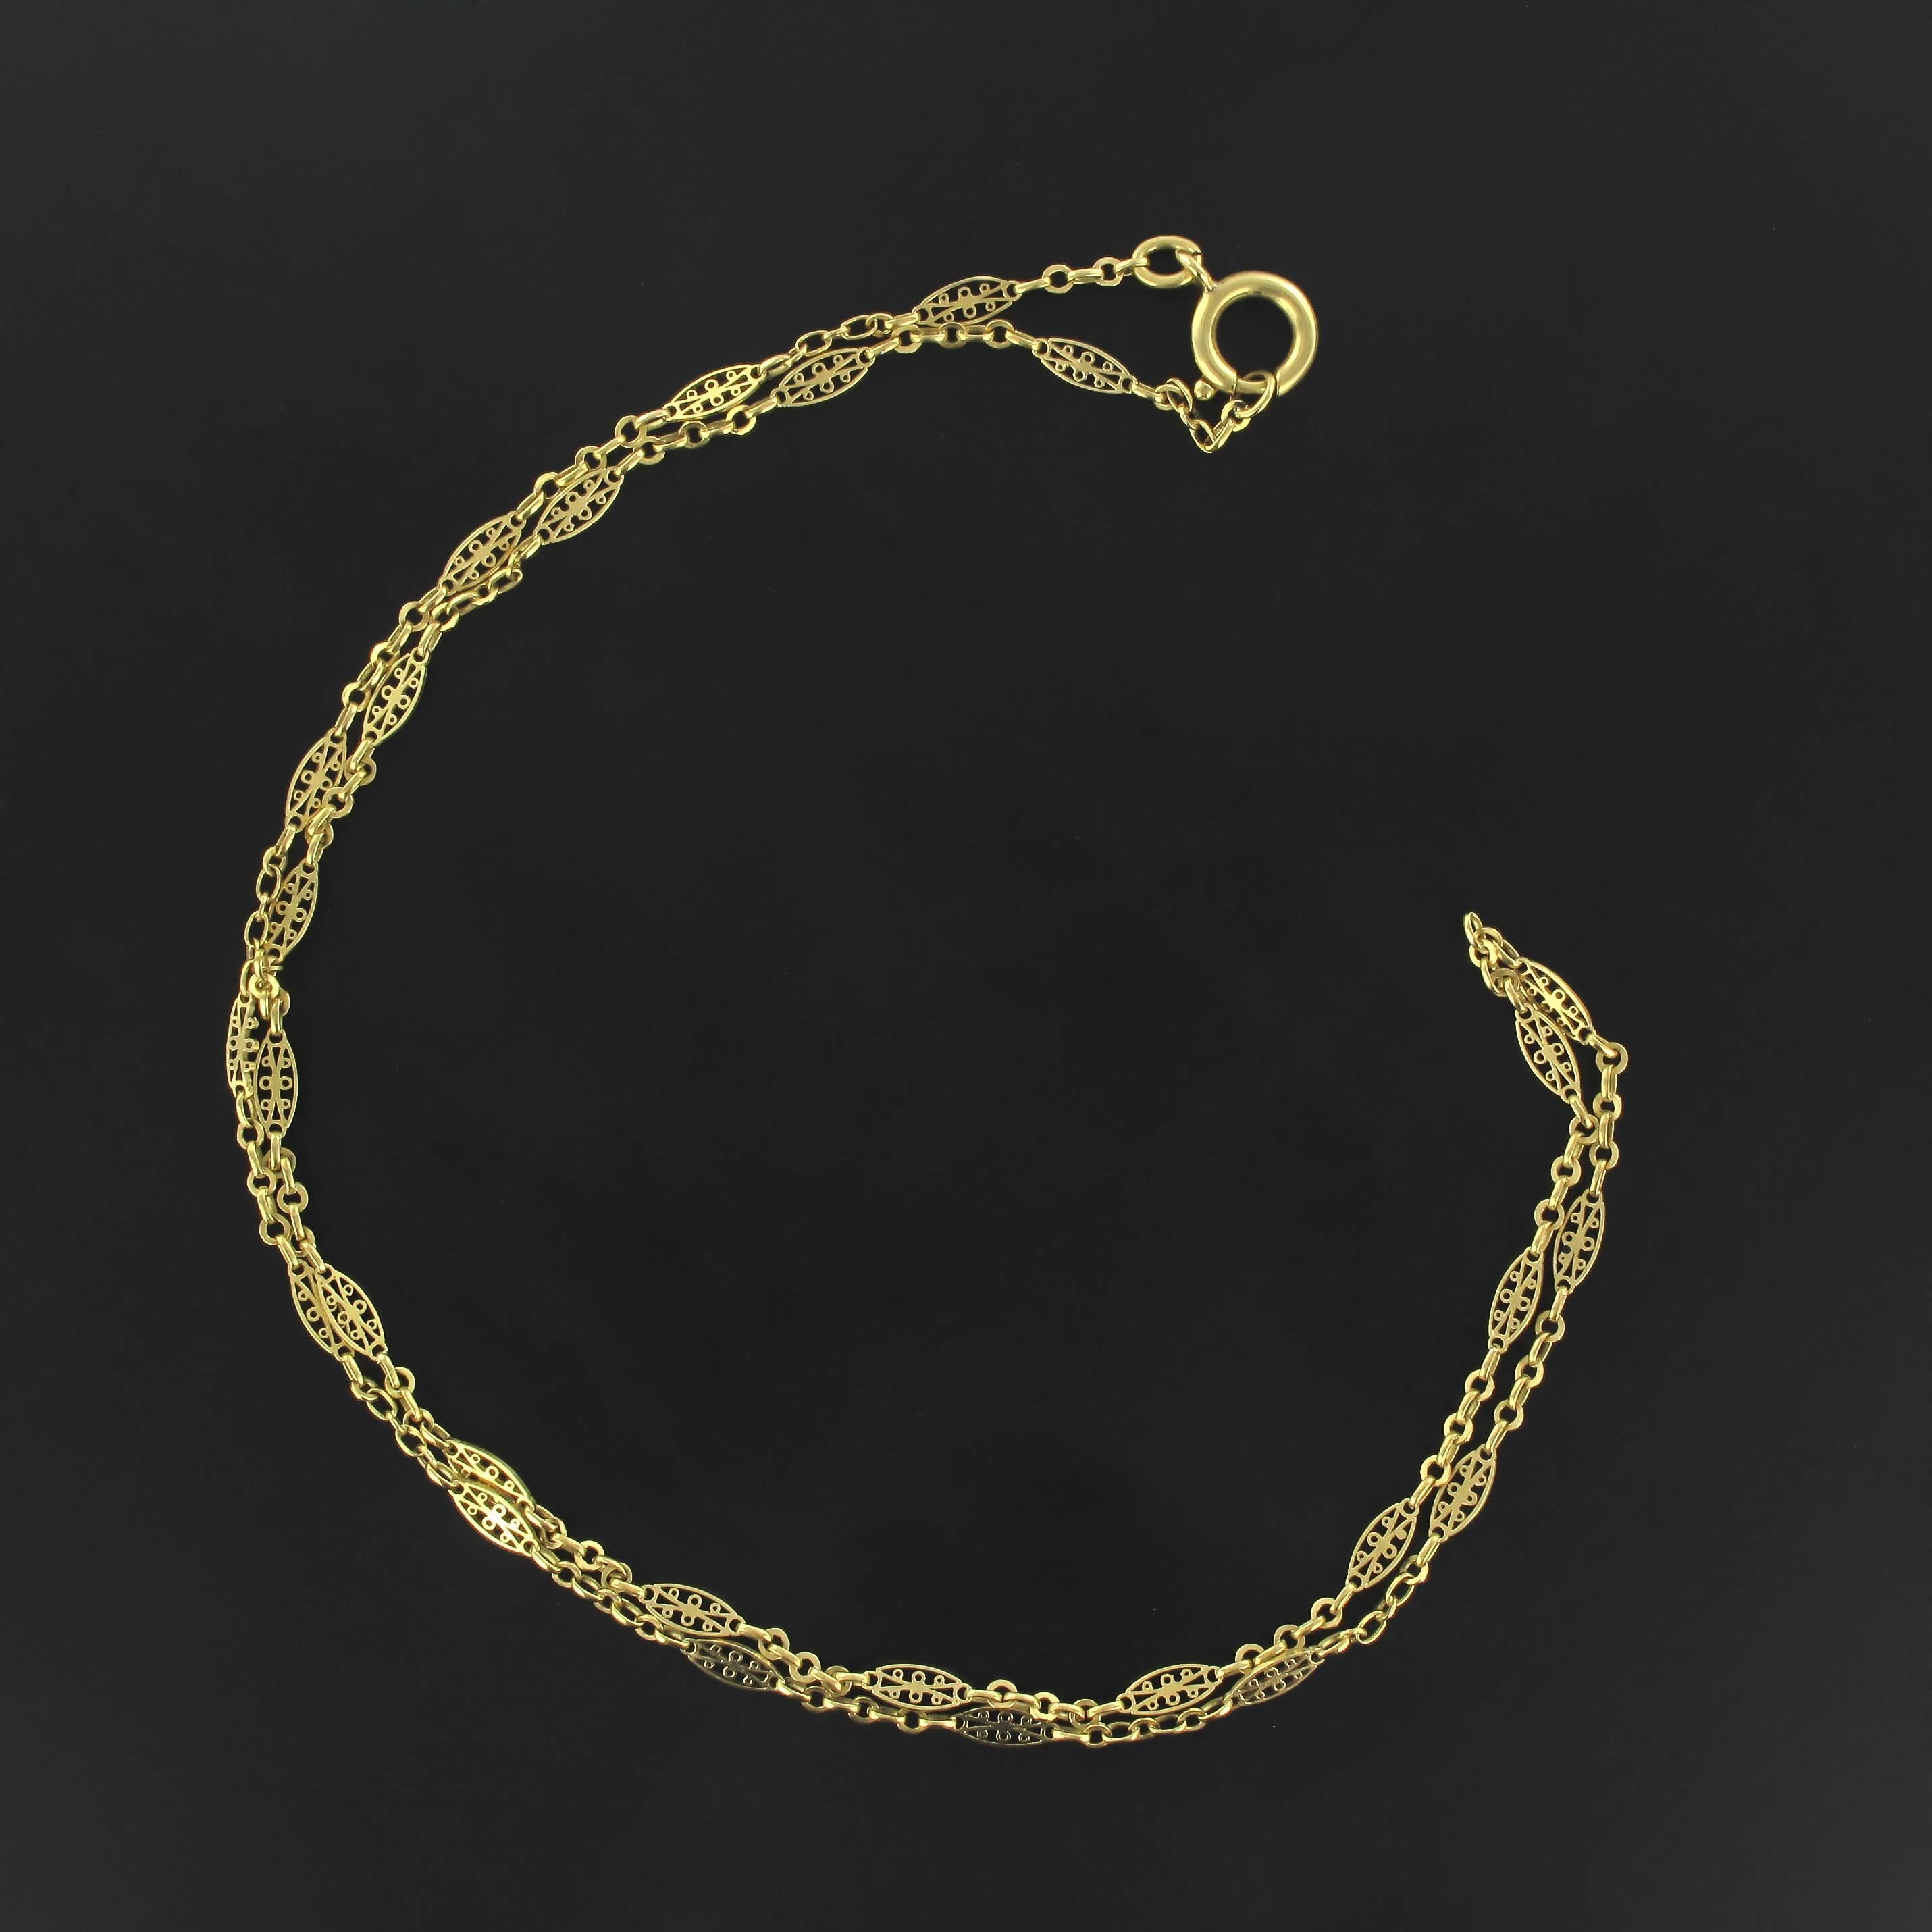 Necklace in 18 carat yellow gold, eagle head hallmark. 

This splendid antique matinee necklace is composed of openwork filigree spindle shaped links. Each link is separated by gold rings. The clasp is a large round spring clasp. 
Overall length: